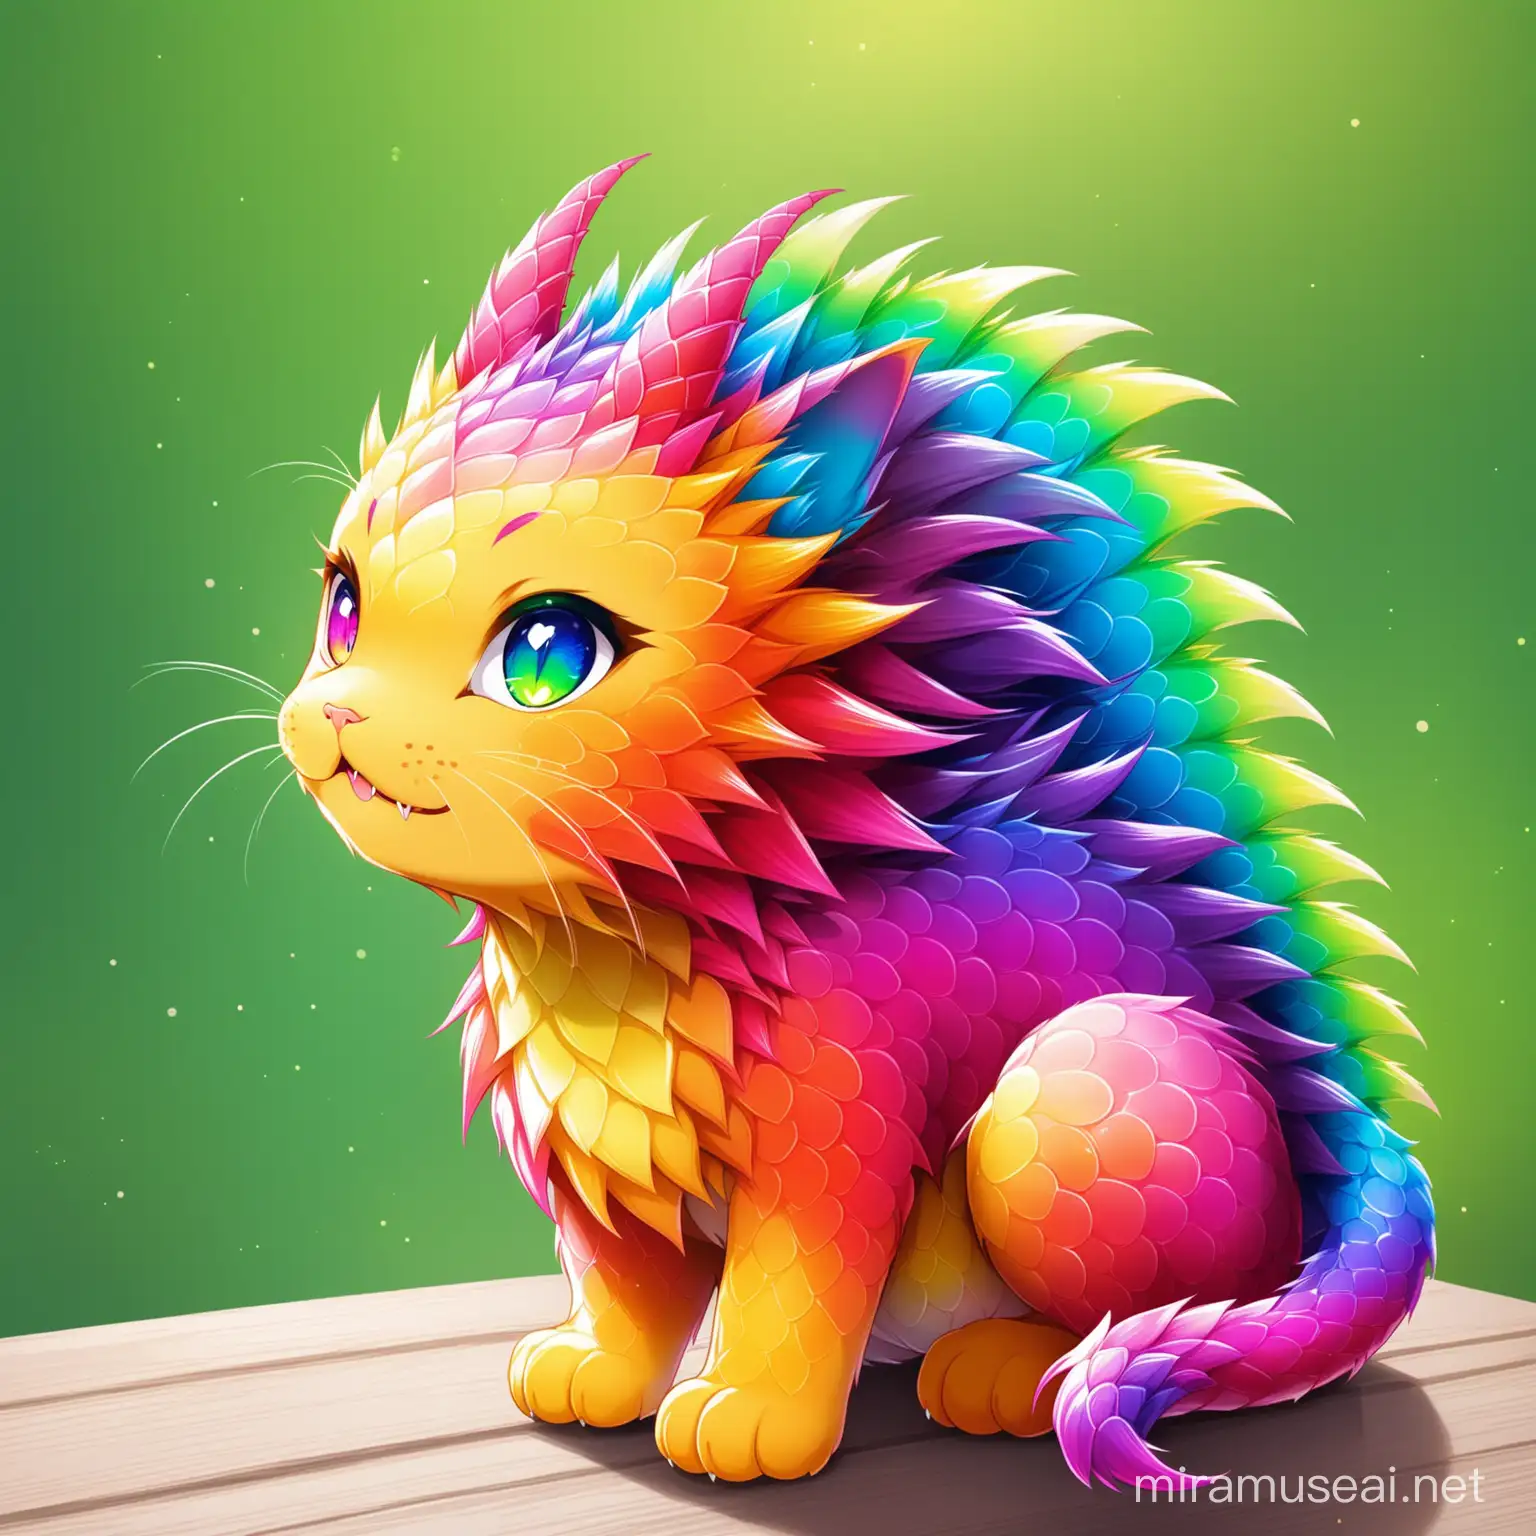 cat that looks like a dragon. rainbow colored